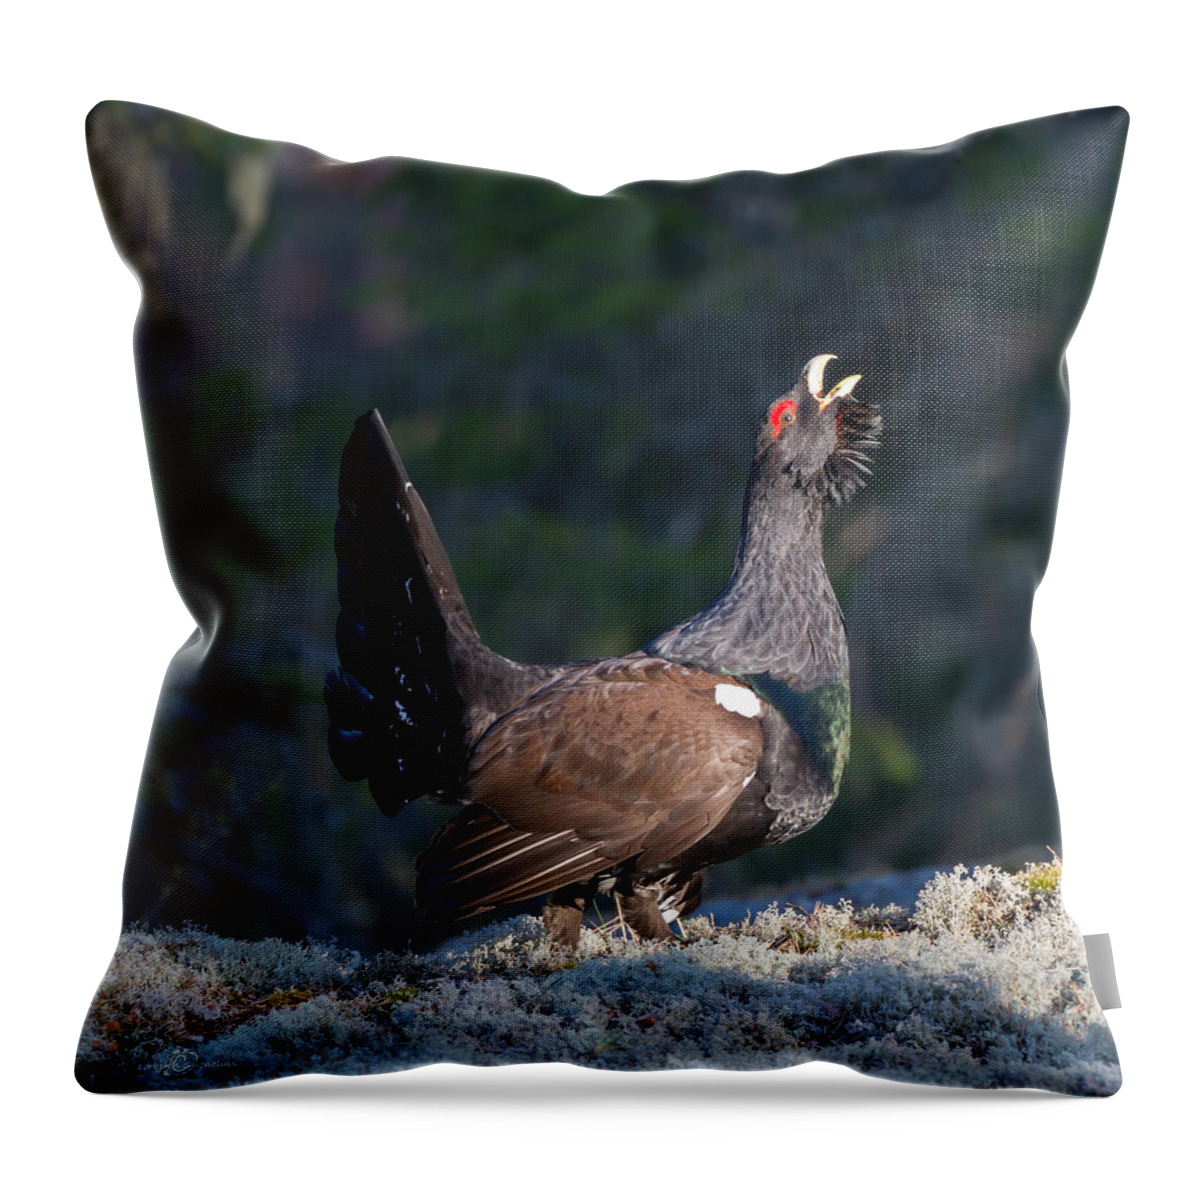 Heather Cock In The Morning Sun Throw Pillow featuring the photograph Heather Cock in the Morning Sun by Torbjorn Swenelius